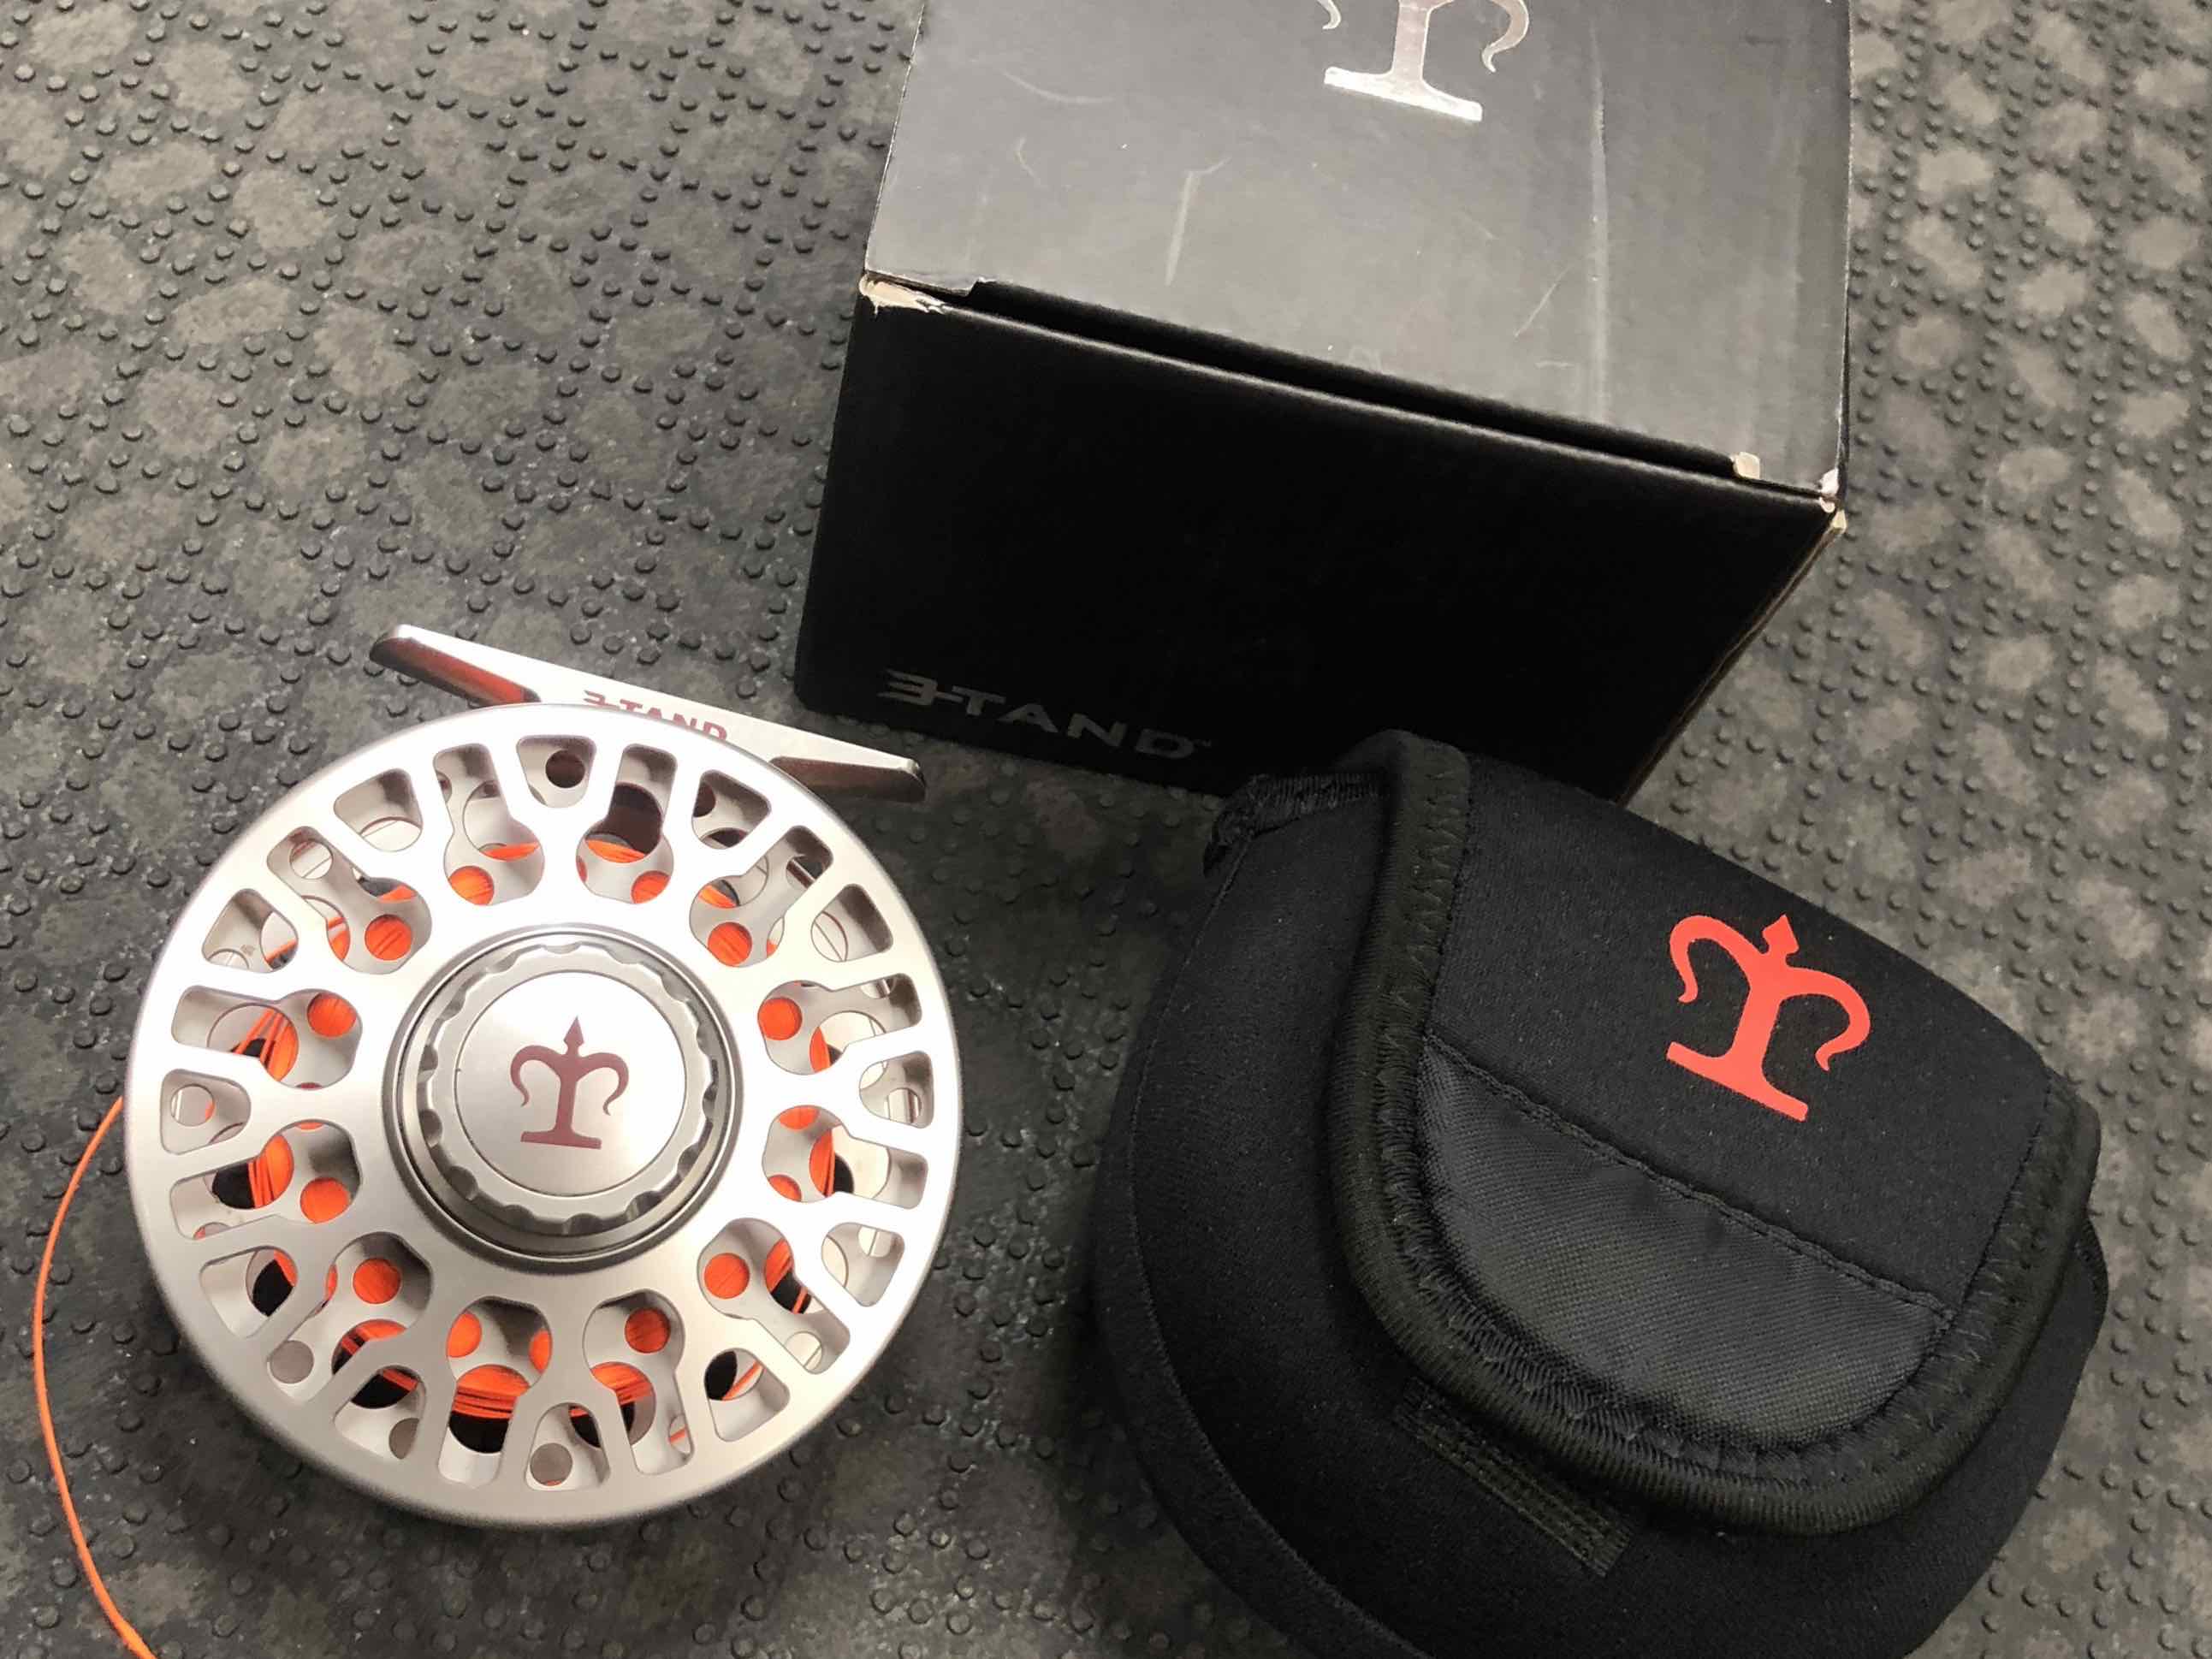 3-Tand - TF50 Fly Reel c/w Backing - LIKE NEW! - $150